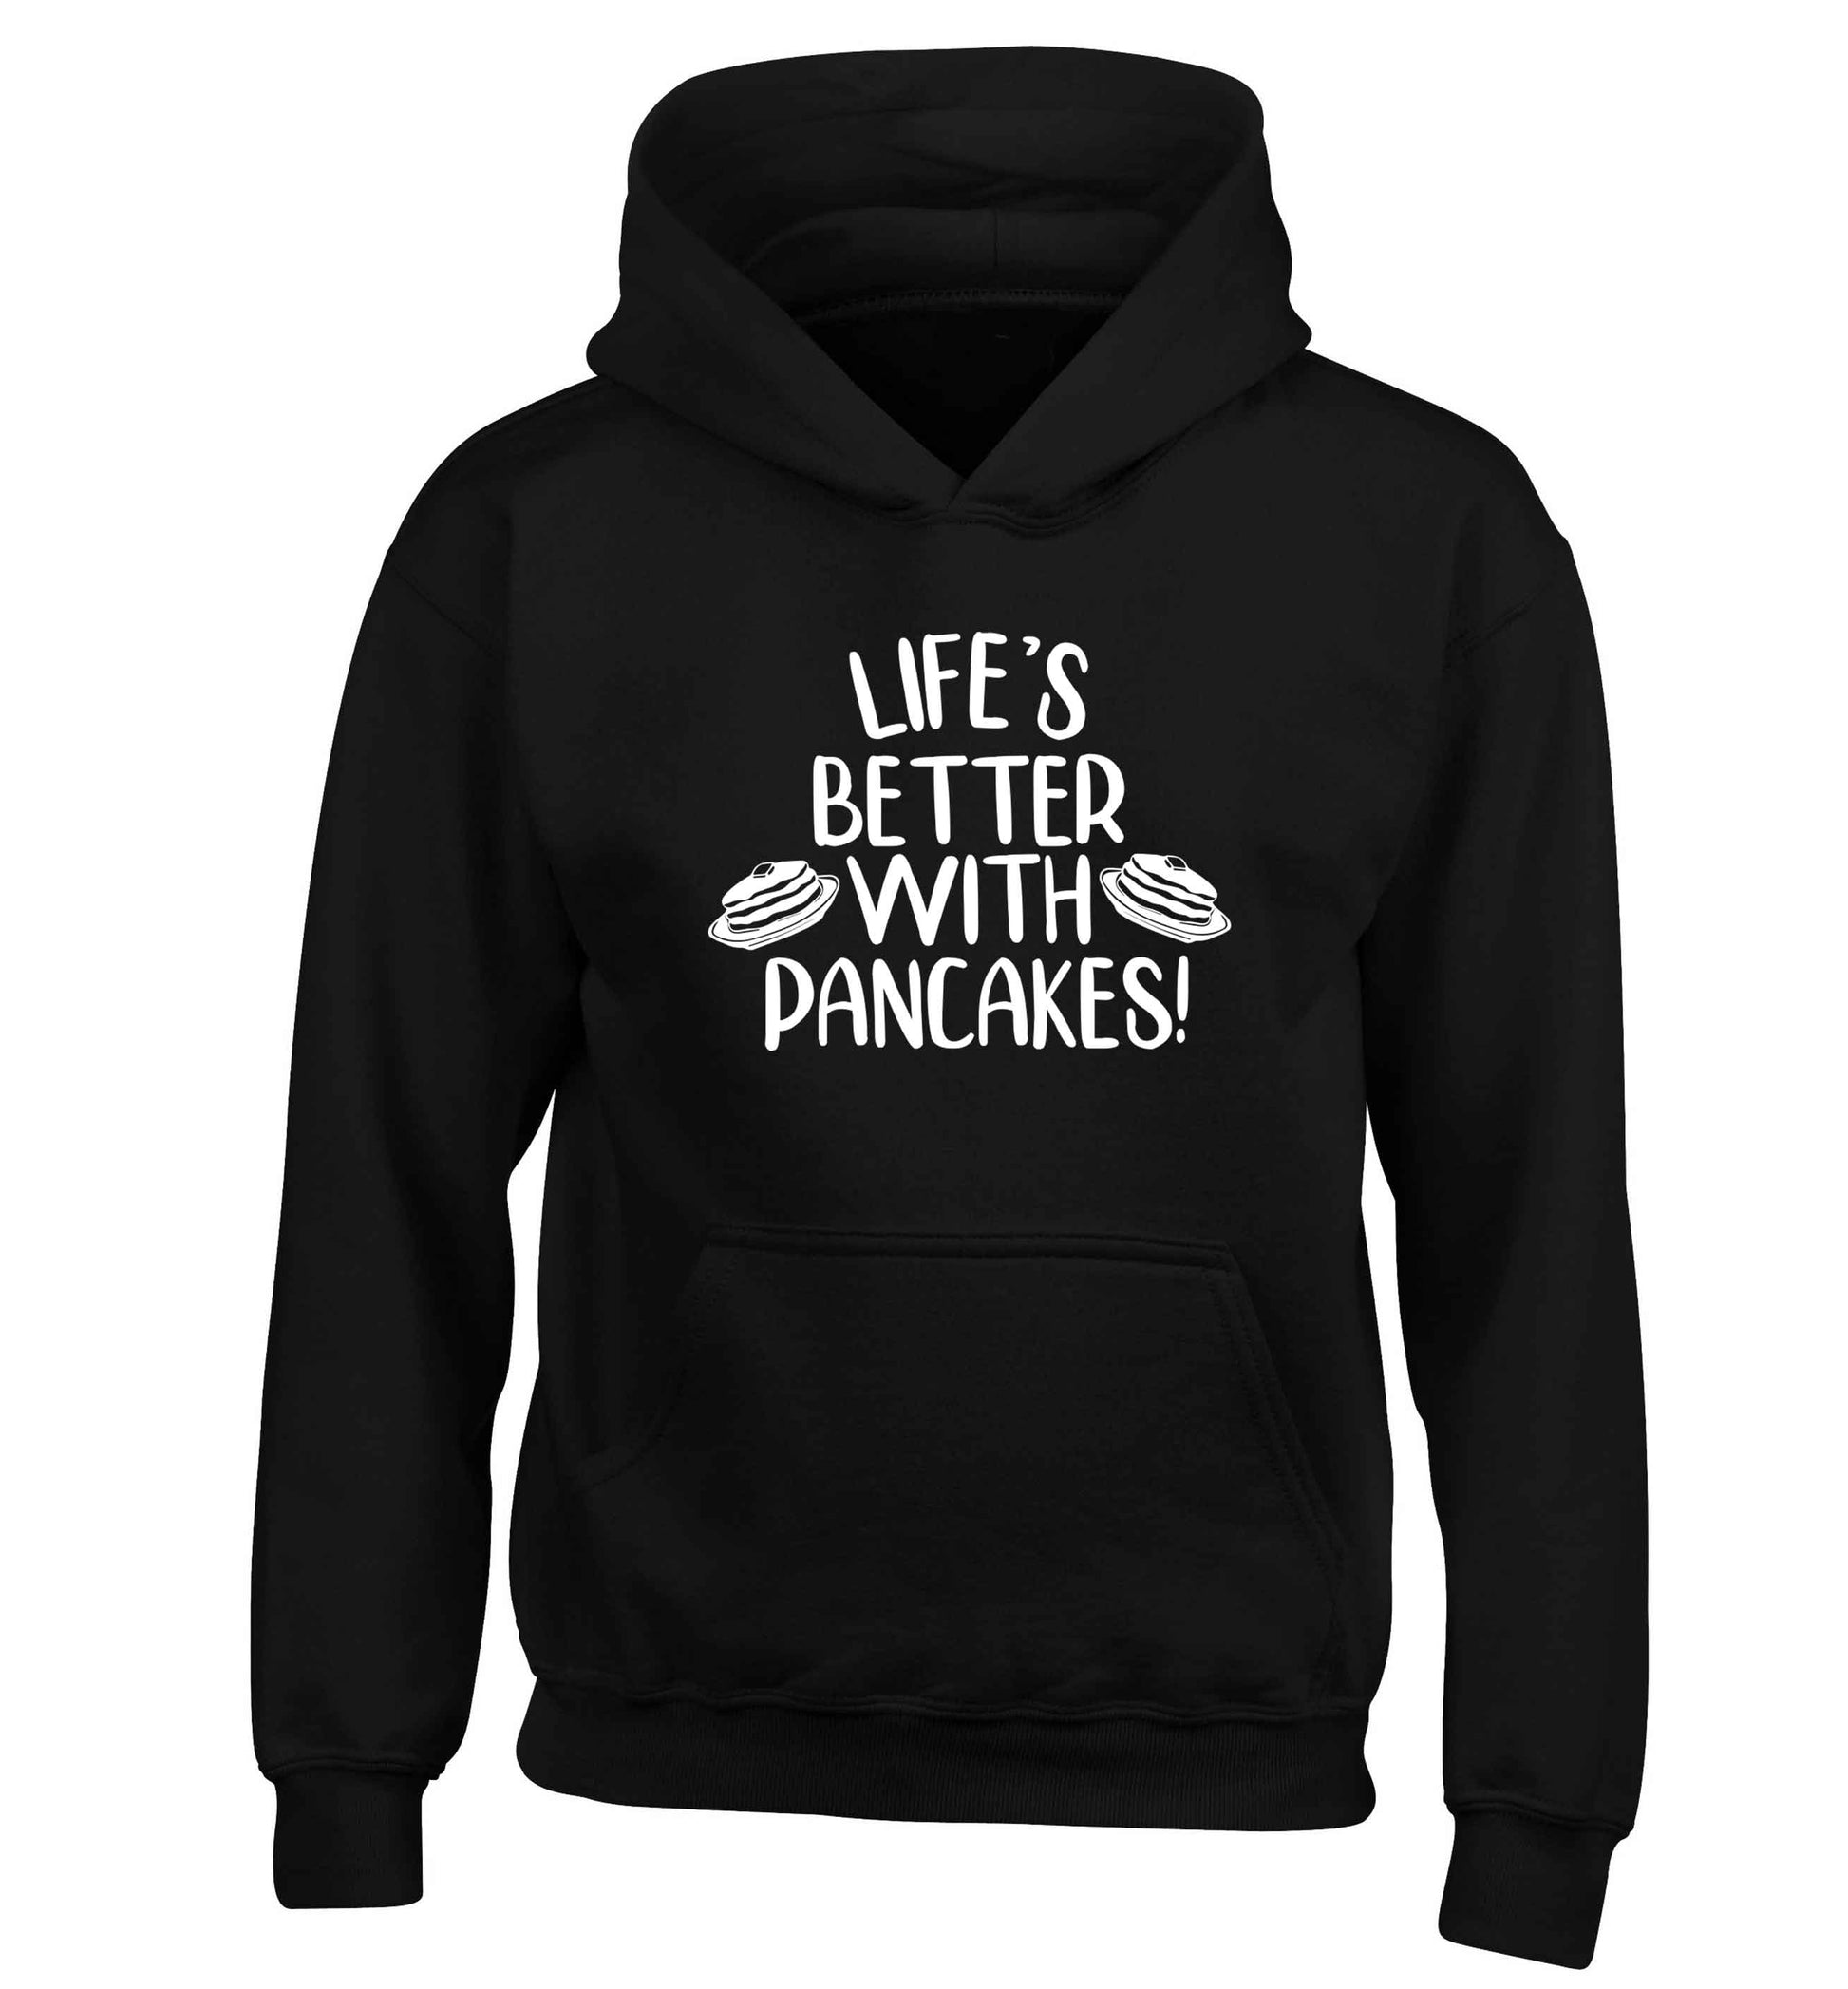 Life's better with pancakes children's black hoodie 12-13 Years